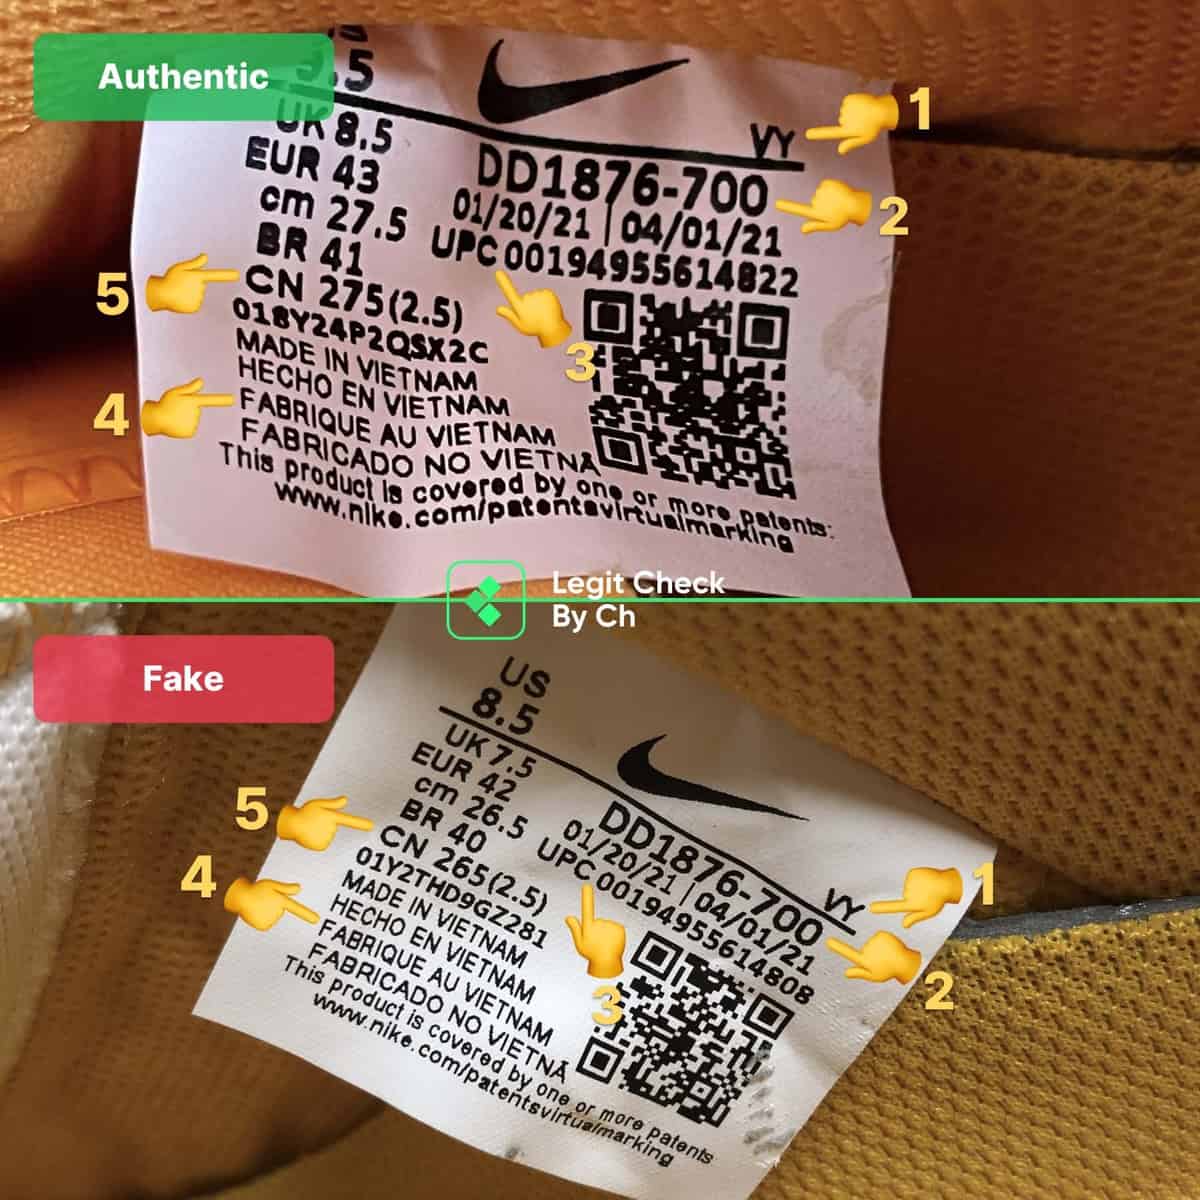 Nike X Off-White Air Force 1 University Gold Fake Vs Real Guide - OW ...